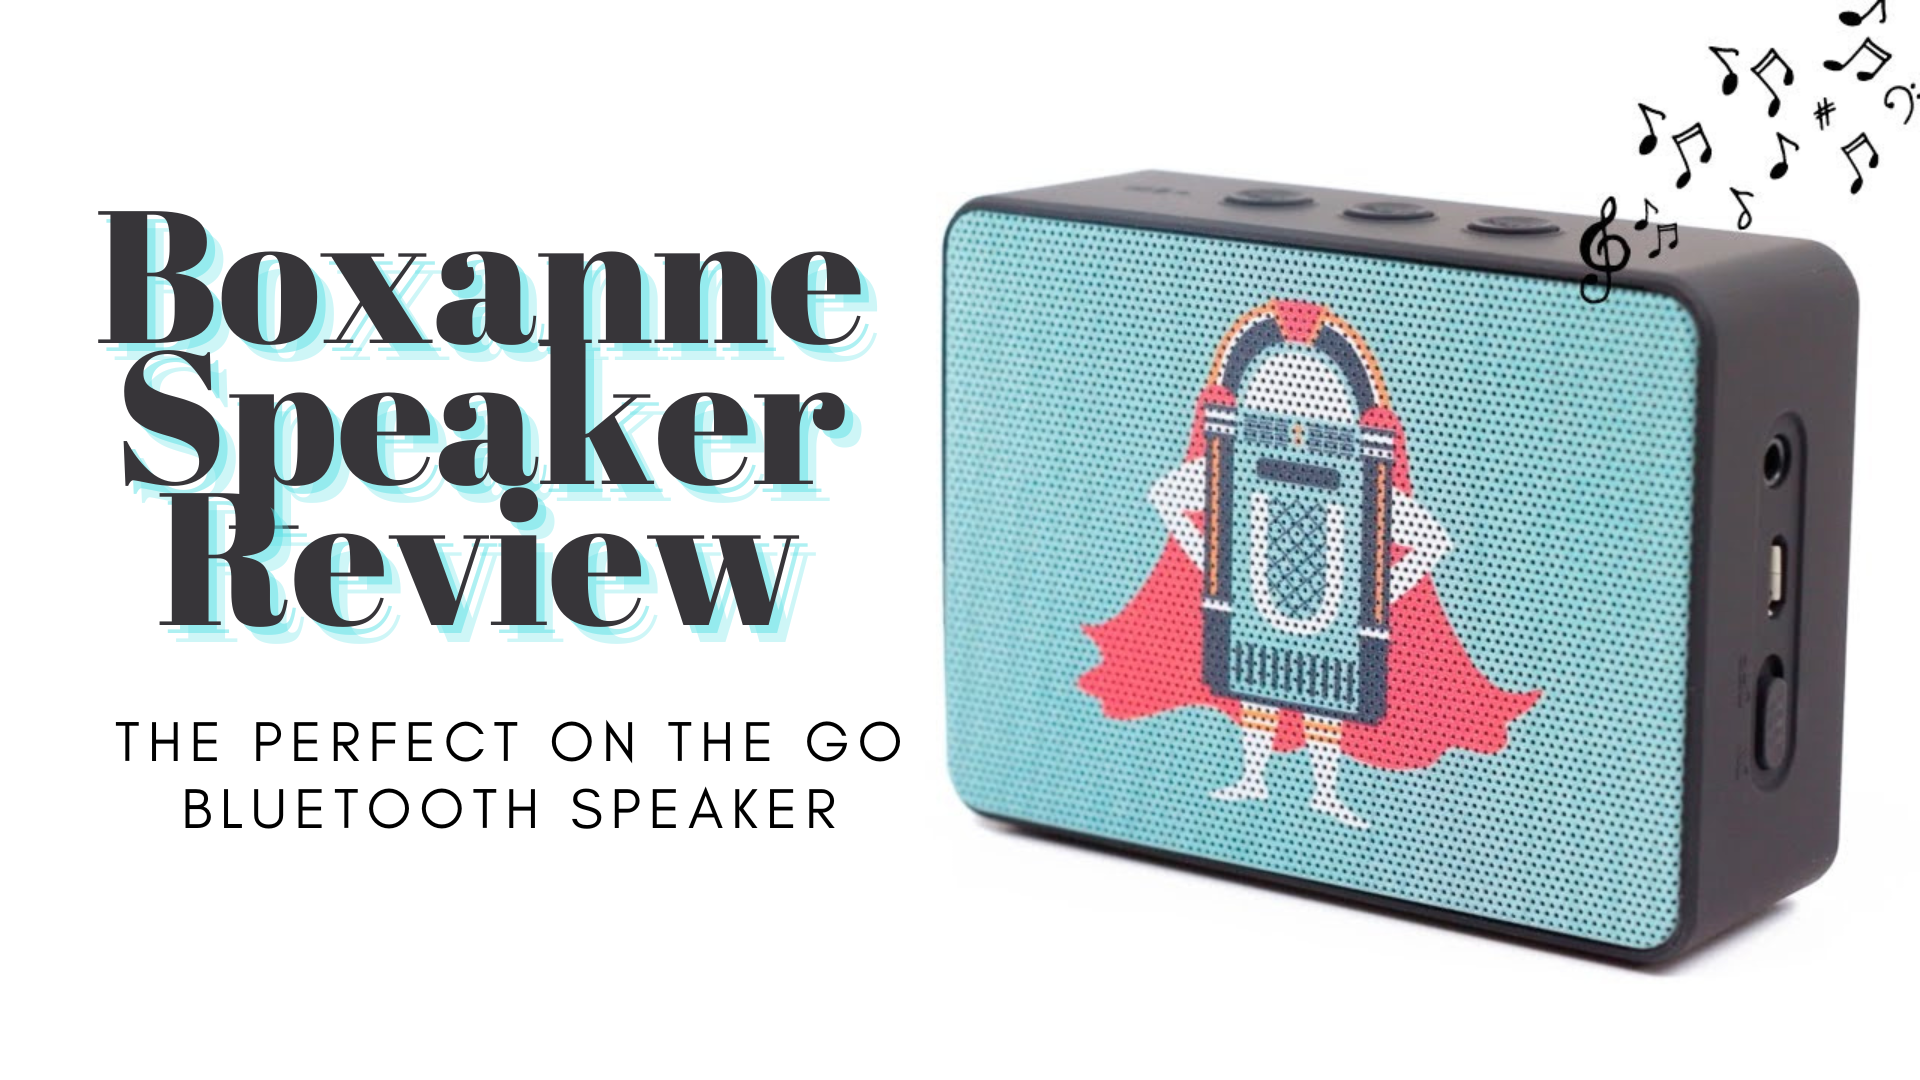 Boxanne Speaker Review - The Perfect On The Go Bluetooth Speaker